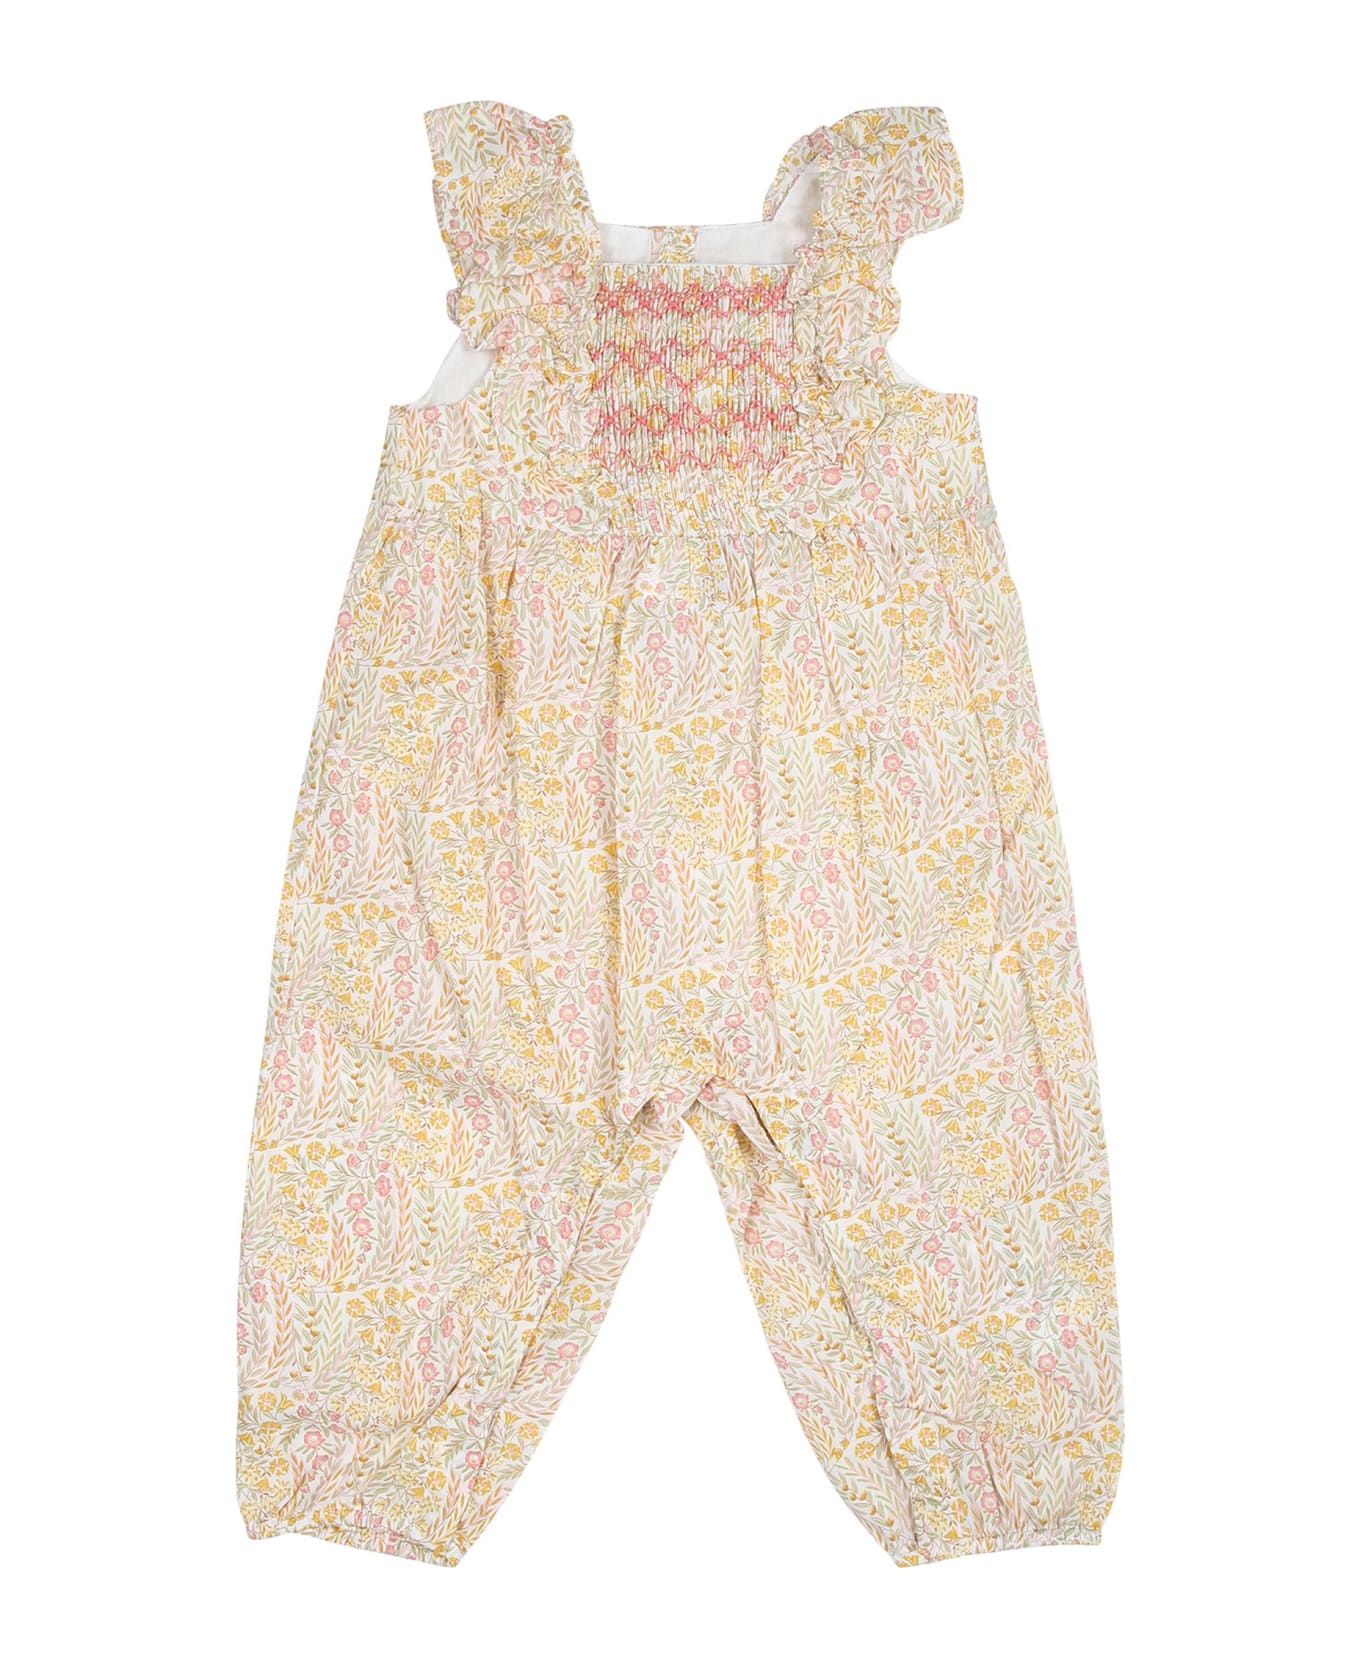 Tartine et Chocolat Ivory Dungarees For Baby Girl With Liberty Fabric - Ivory